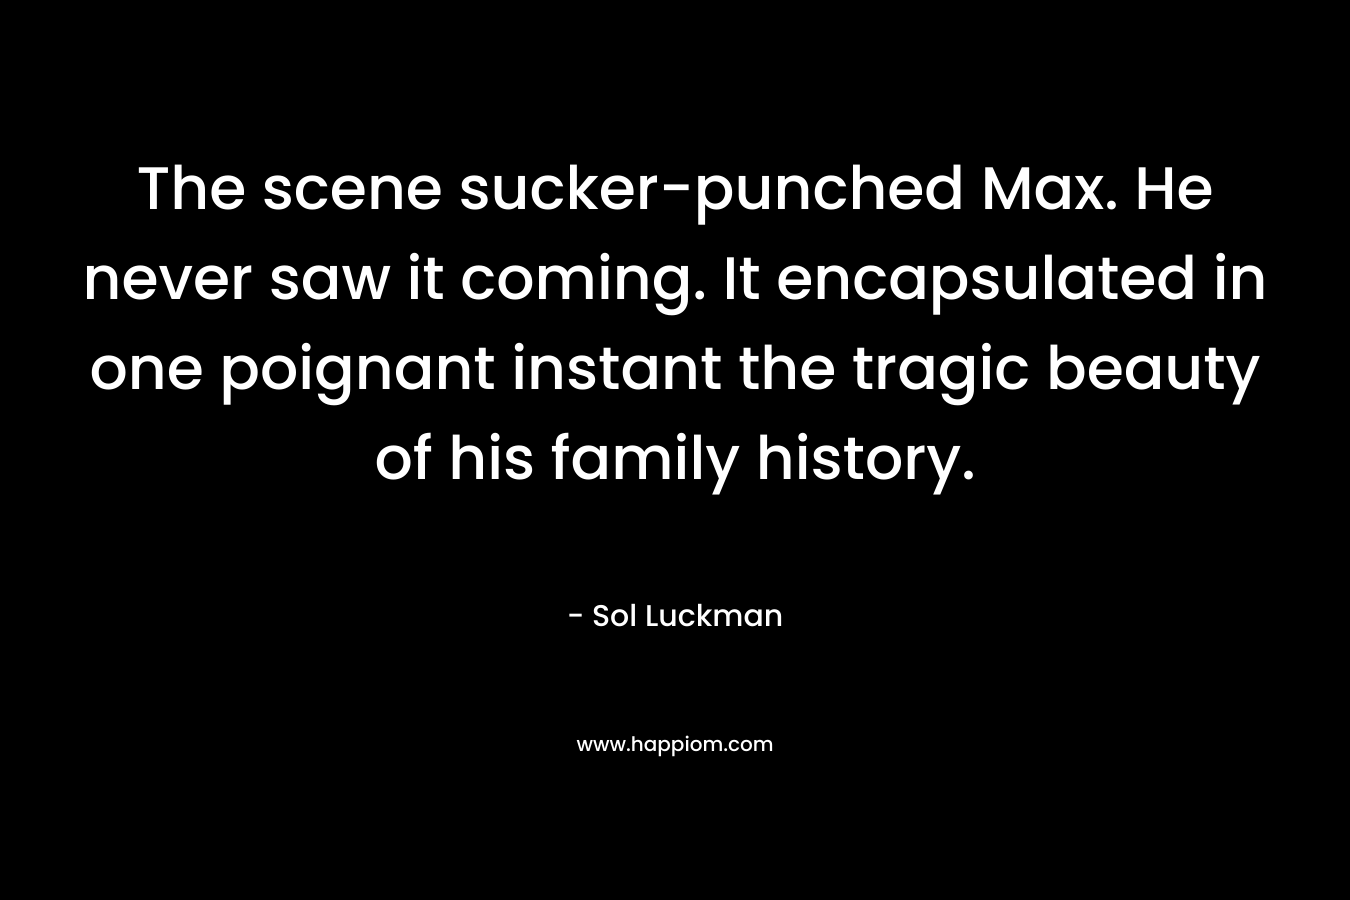 The scene sucker-punched Max. He never saw it coming. It encapsulated in one poignant instant the tragic beauty of his family history. – Sol Luckman